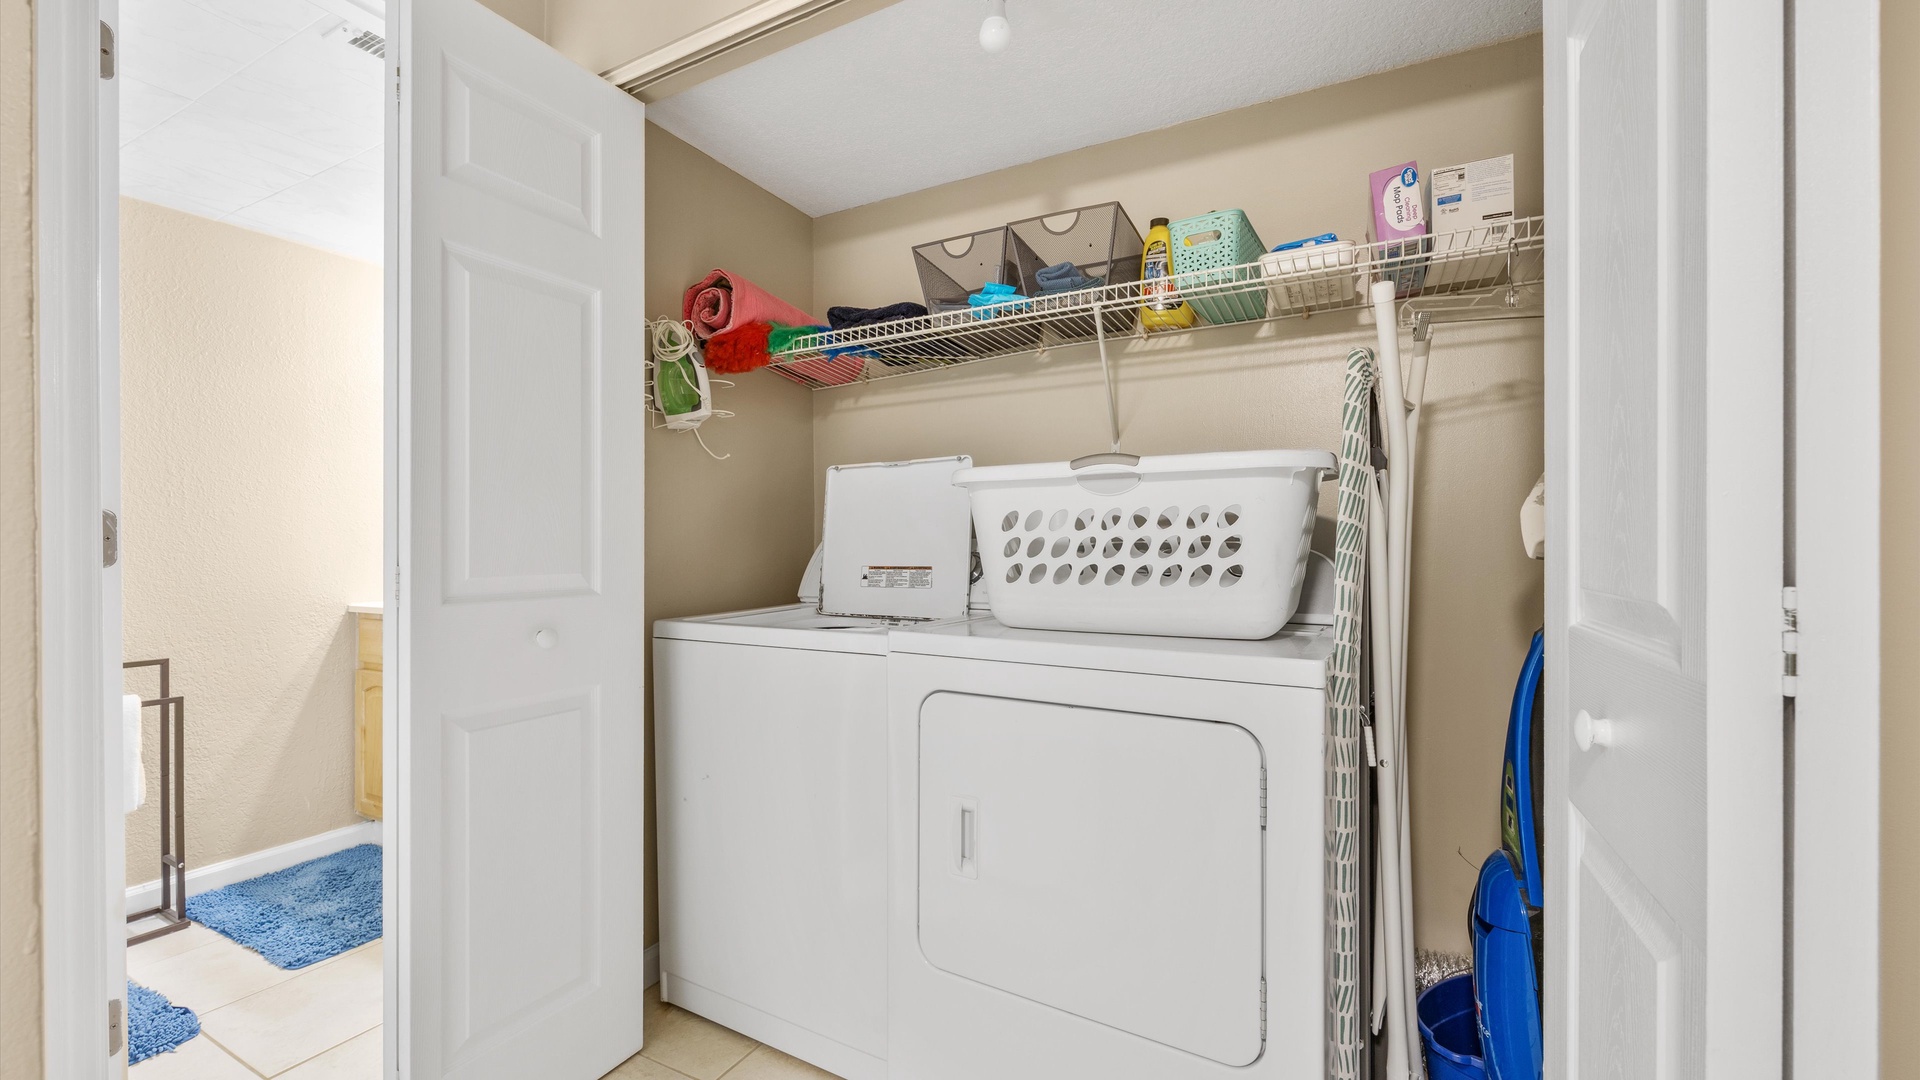 Private laundry is available for your stay, just off the kitchen